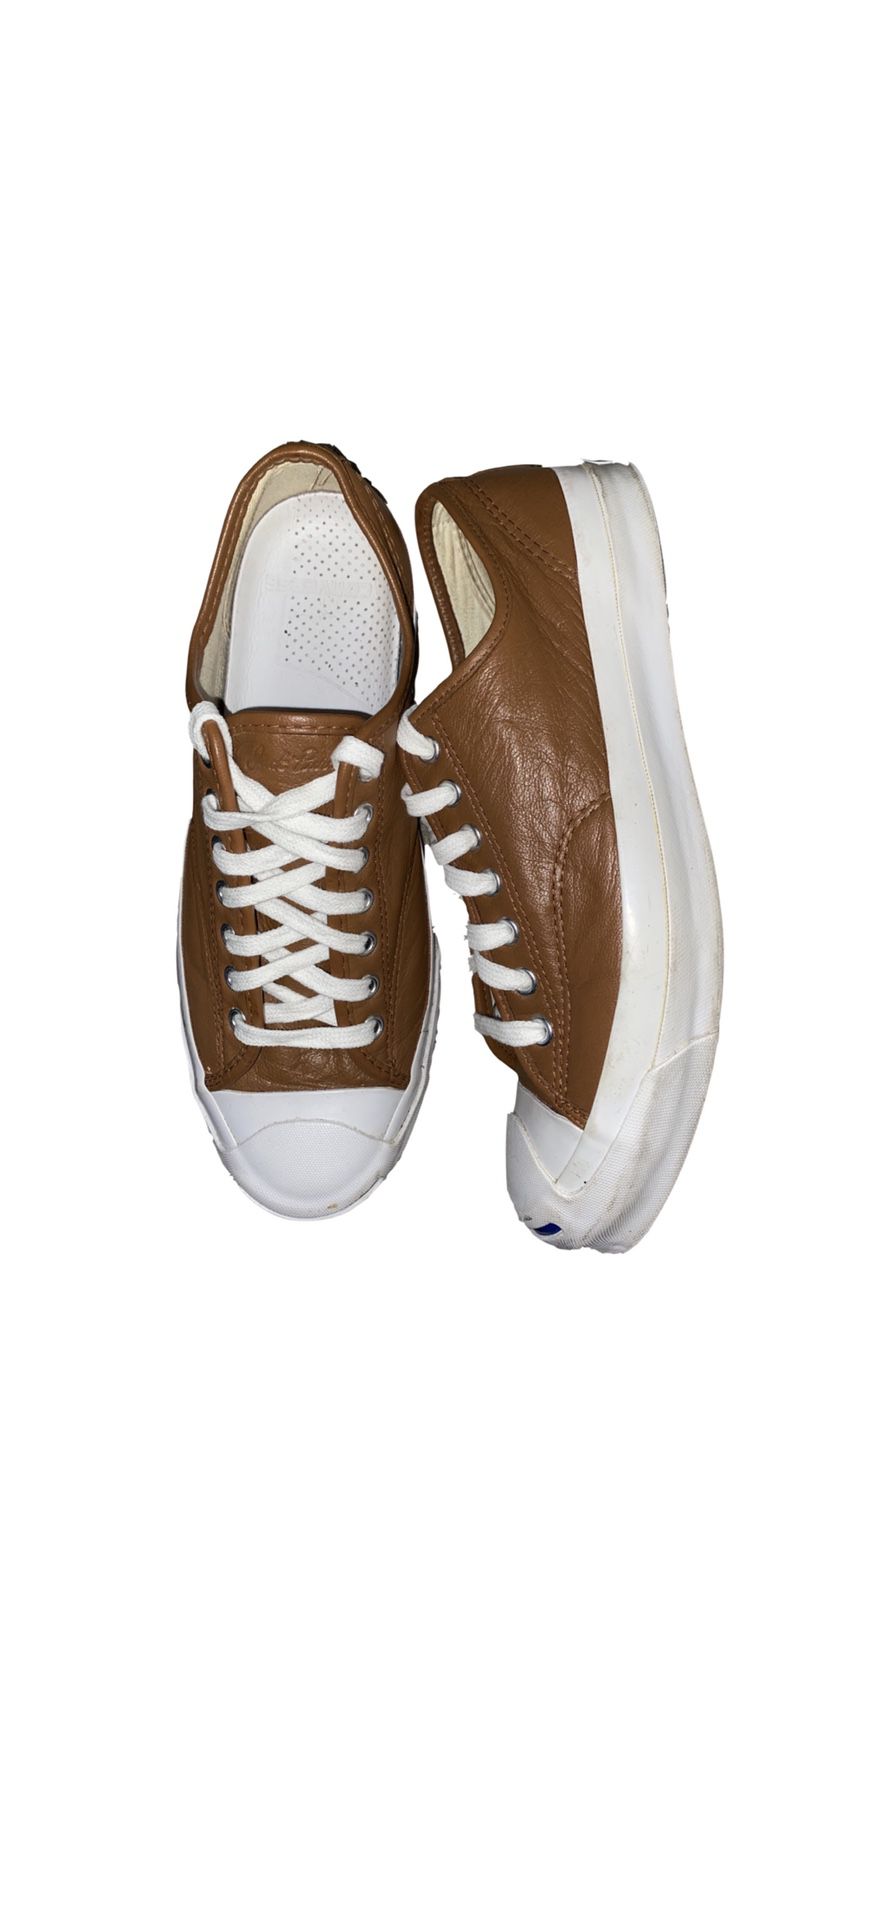 Bopæl maler Kostbar Jack Purcell Brown Leather Converse Low Top Mens size 9.5 for Sale in  Philadelphia, PA - OfferUp